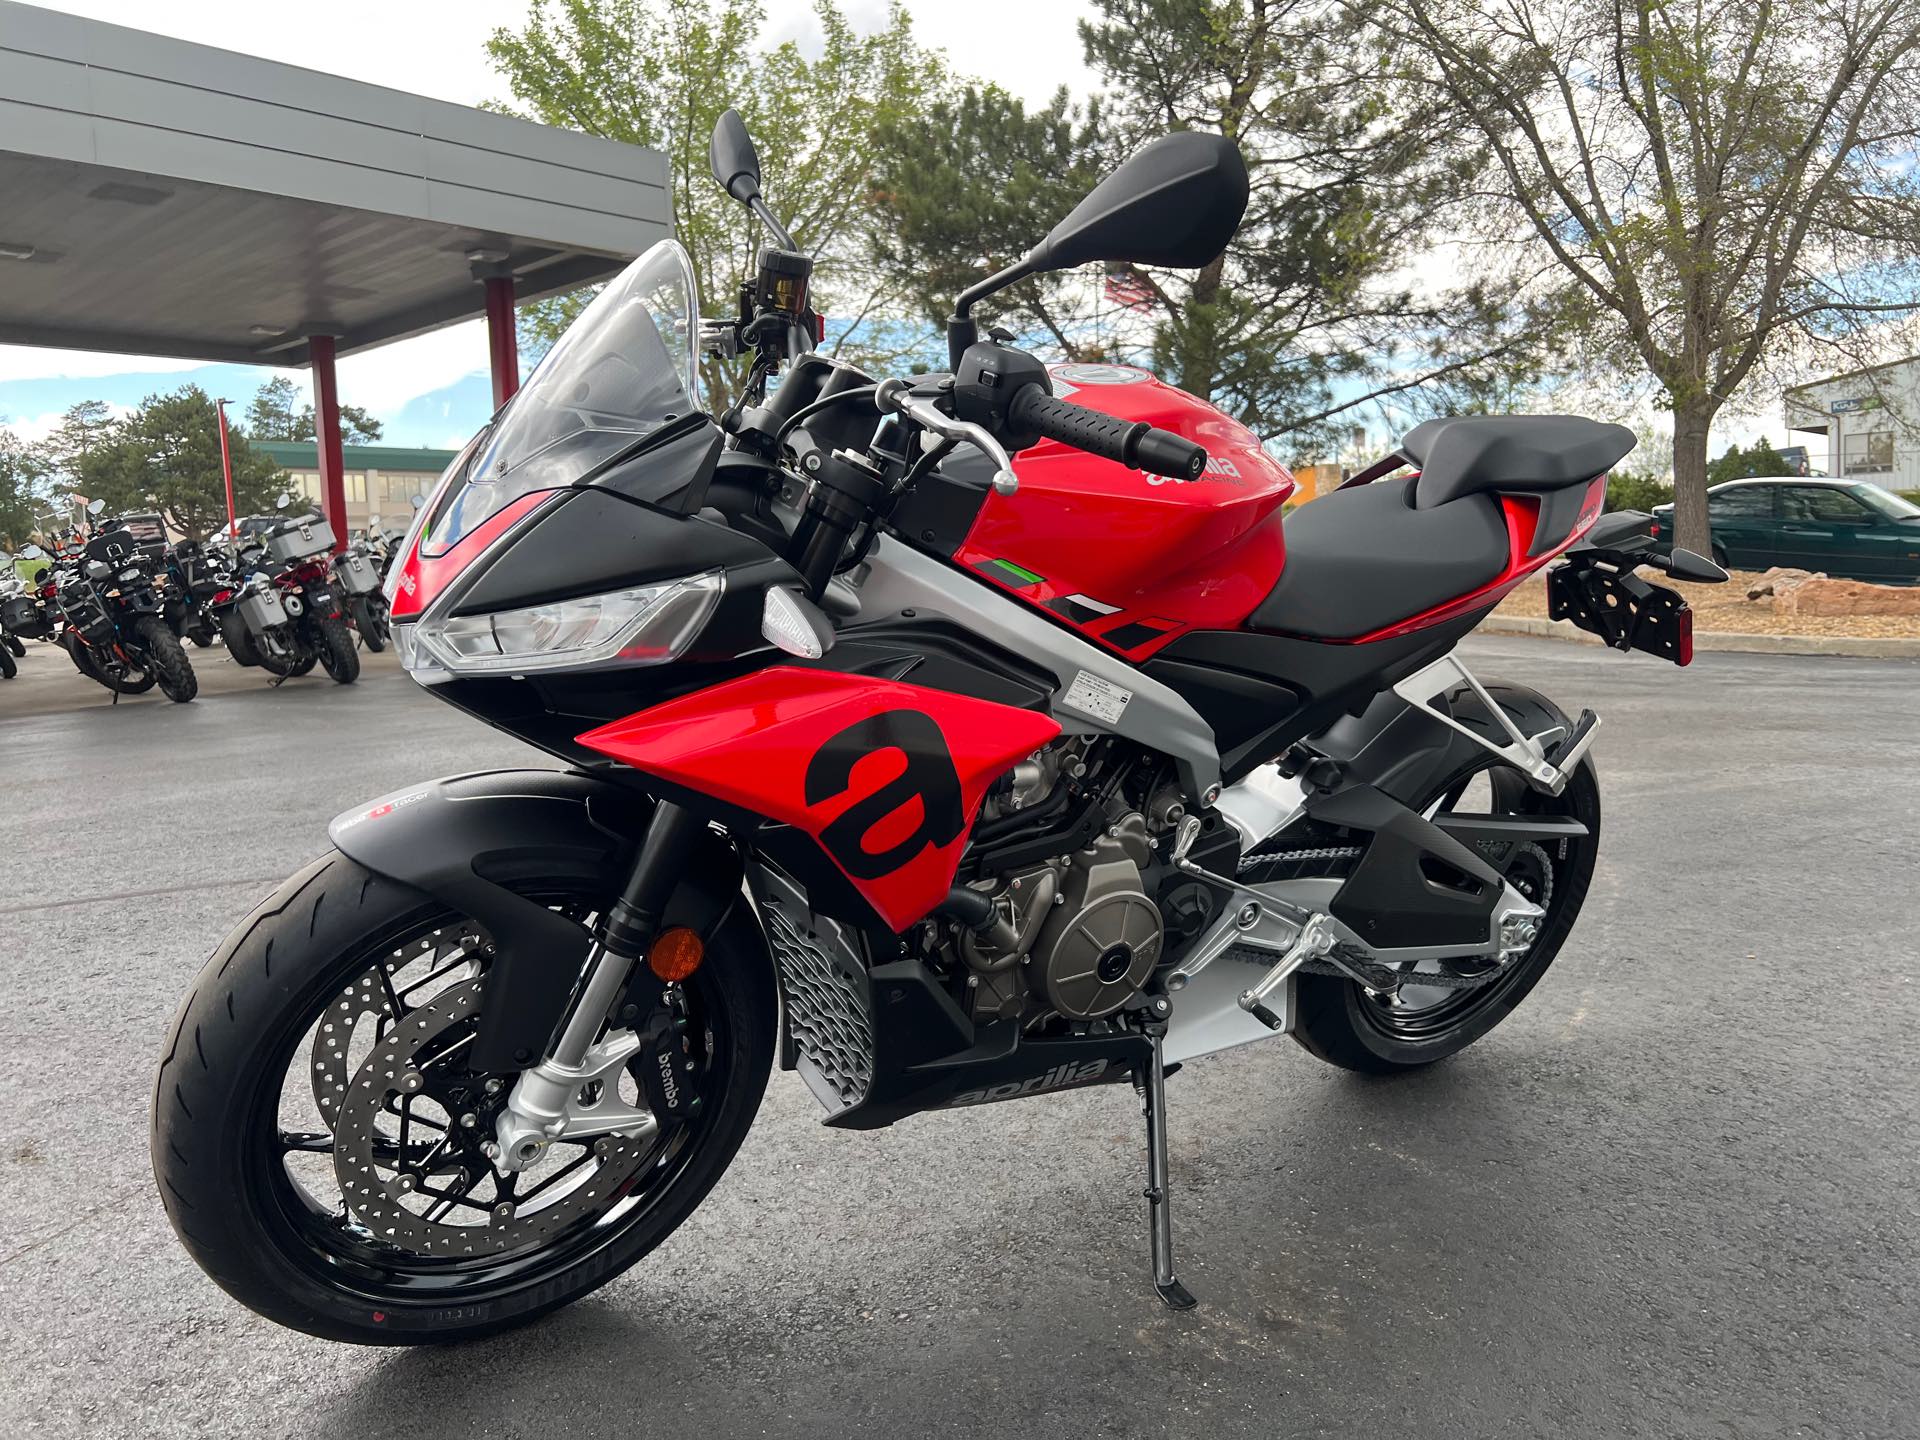 2023 Aprilia Tuono 660 at Aces Motorcycles - Fort Collins